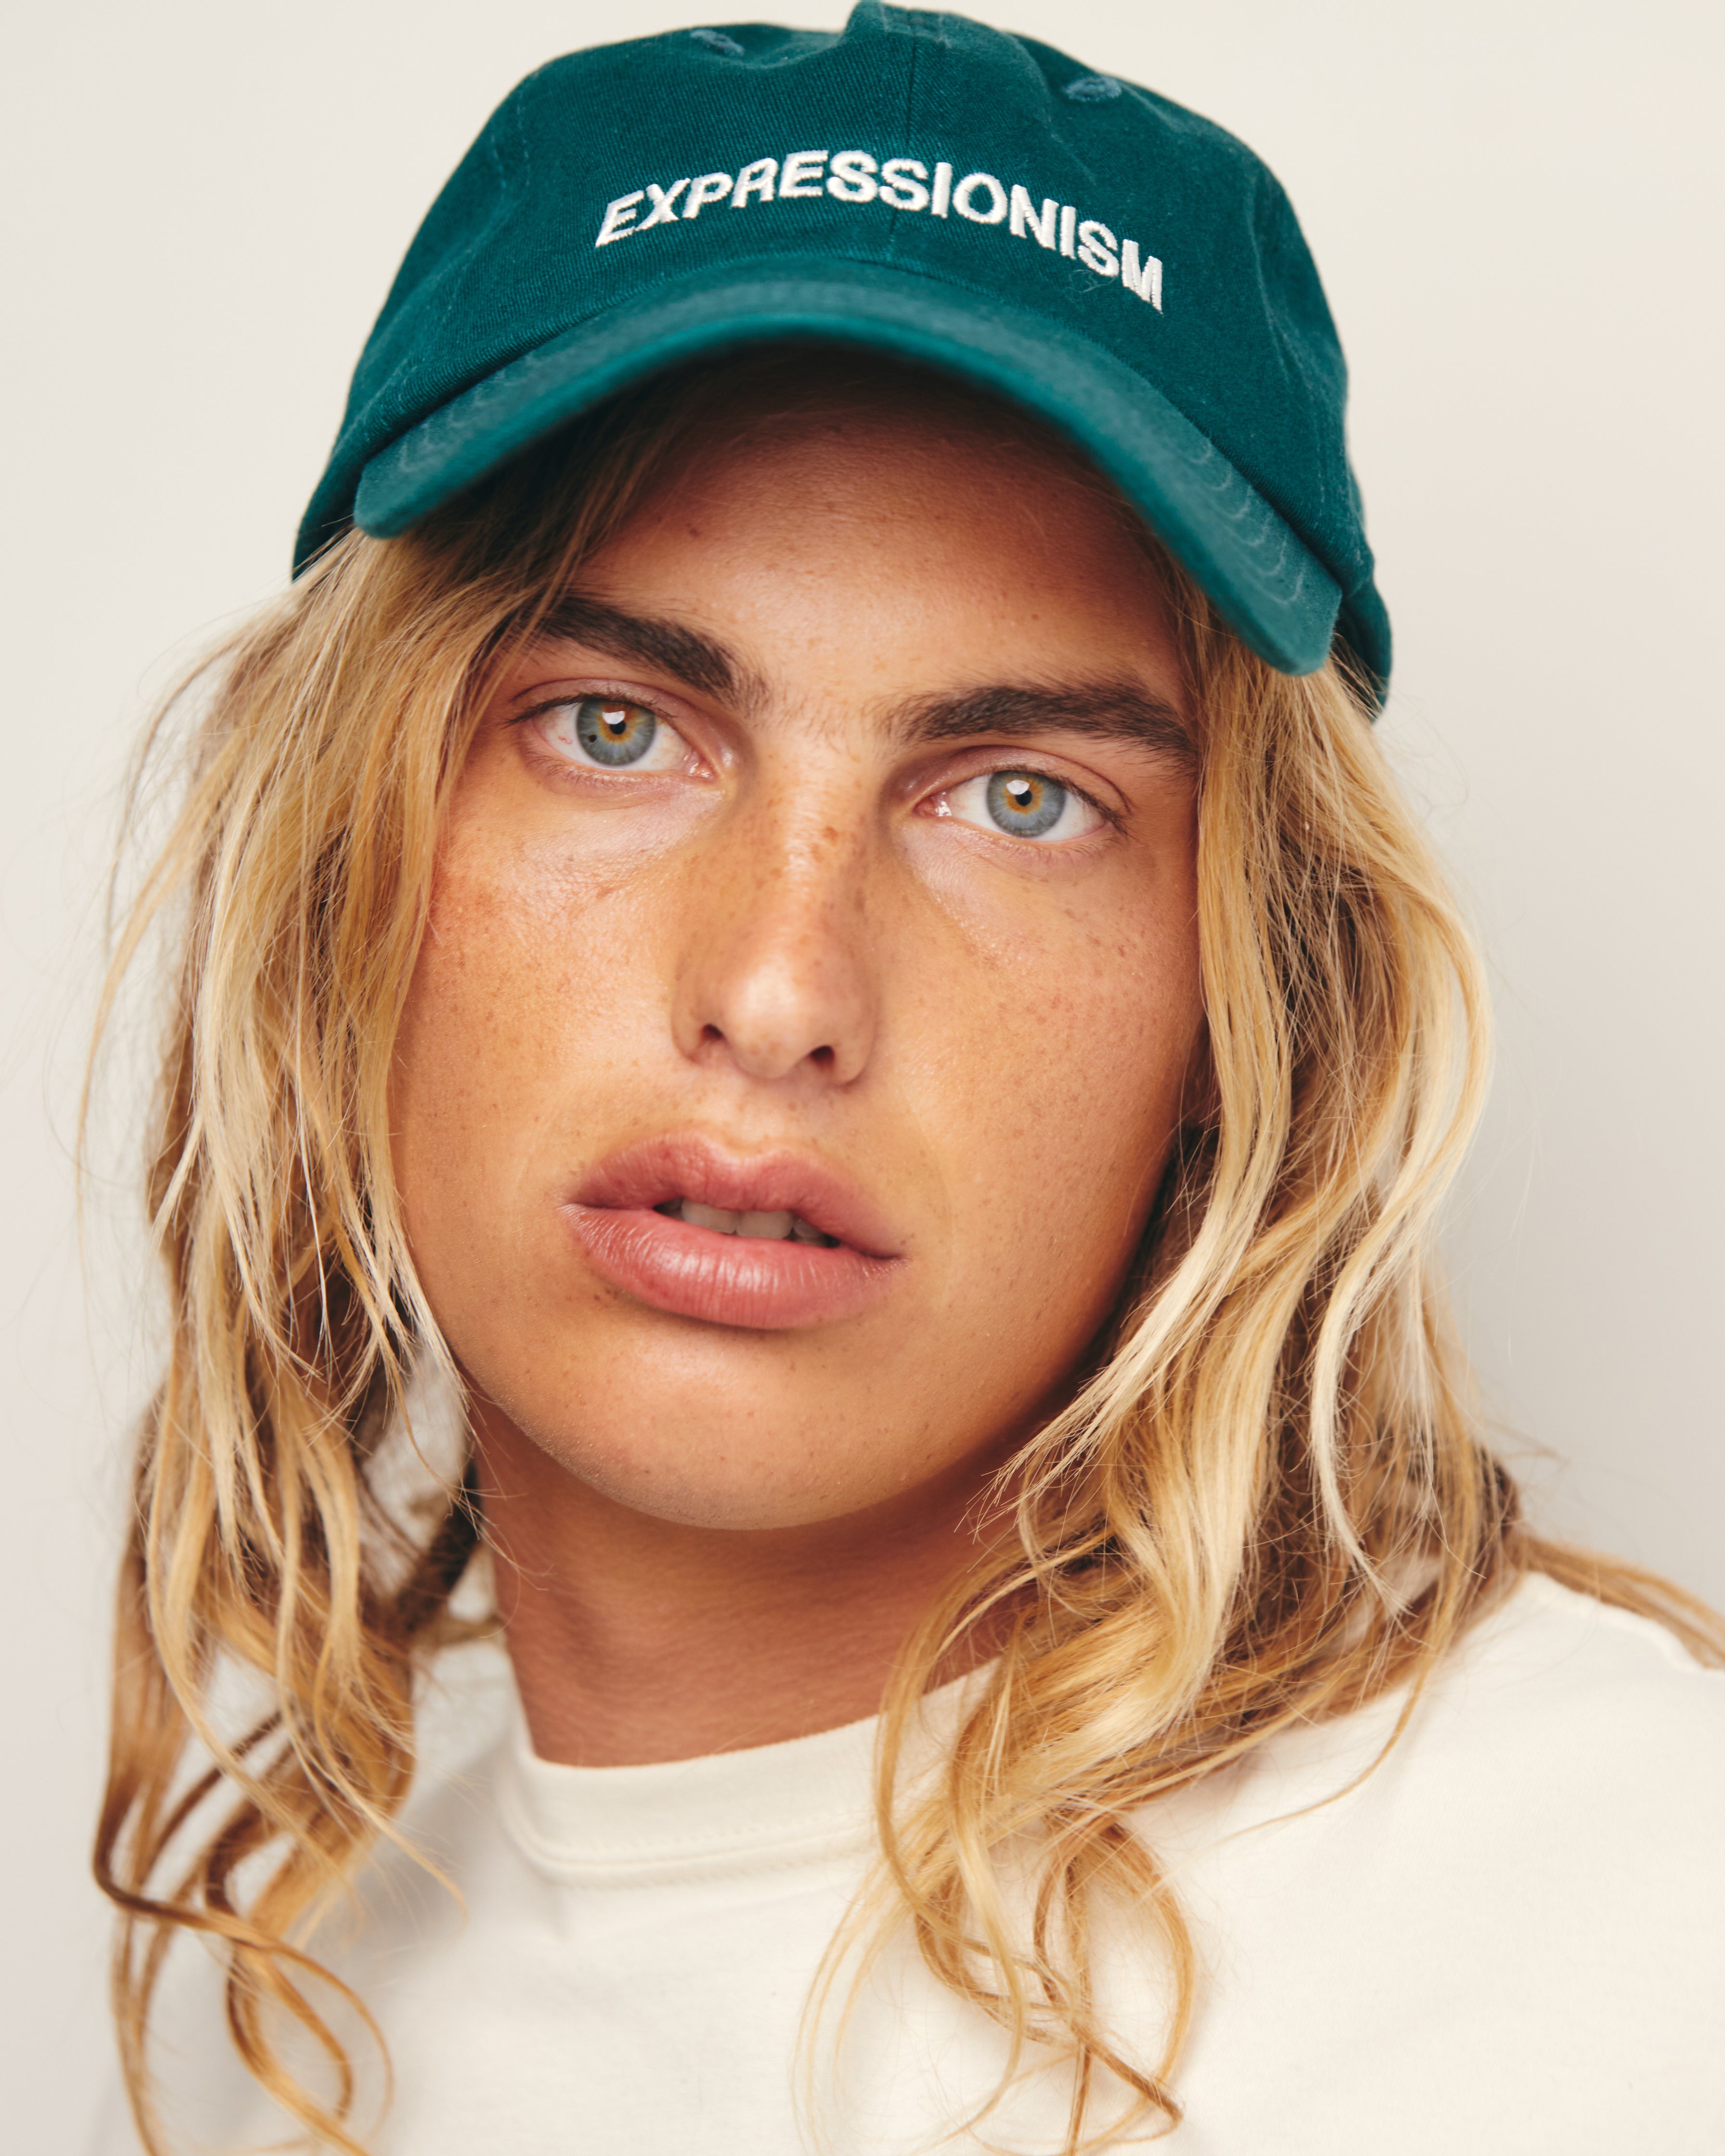 Lucas Ucedo wears Green Baseball Cap / Dad Hat with Expressionism Art Movement Text Embroidery on Front. 100% Cotton.